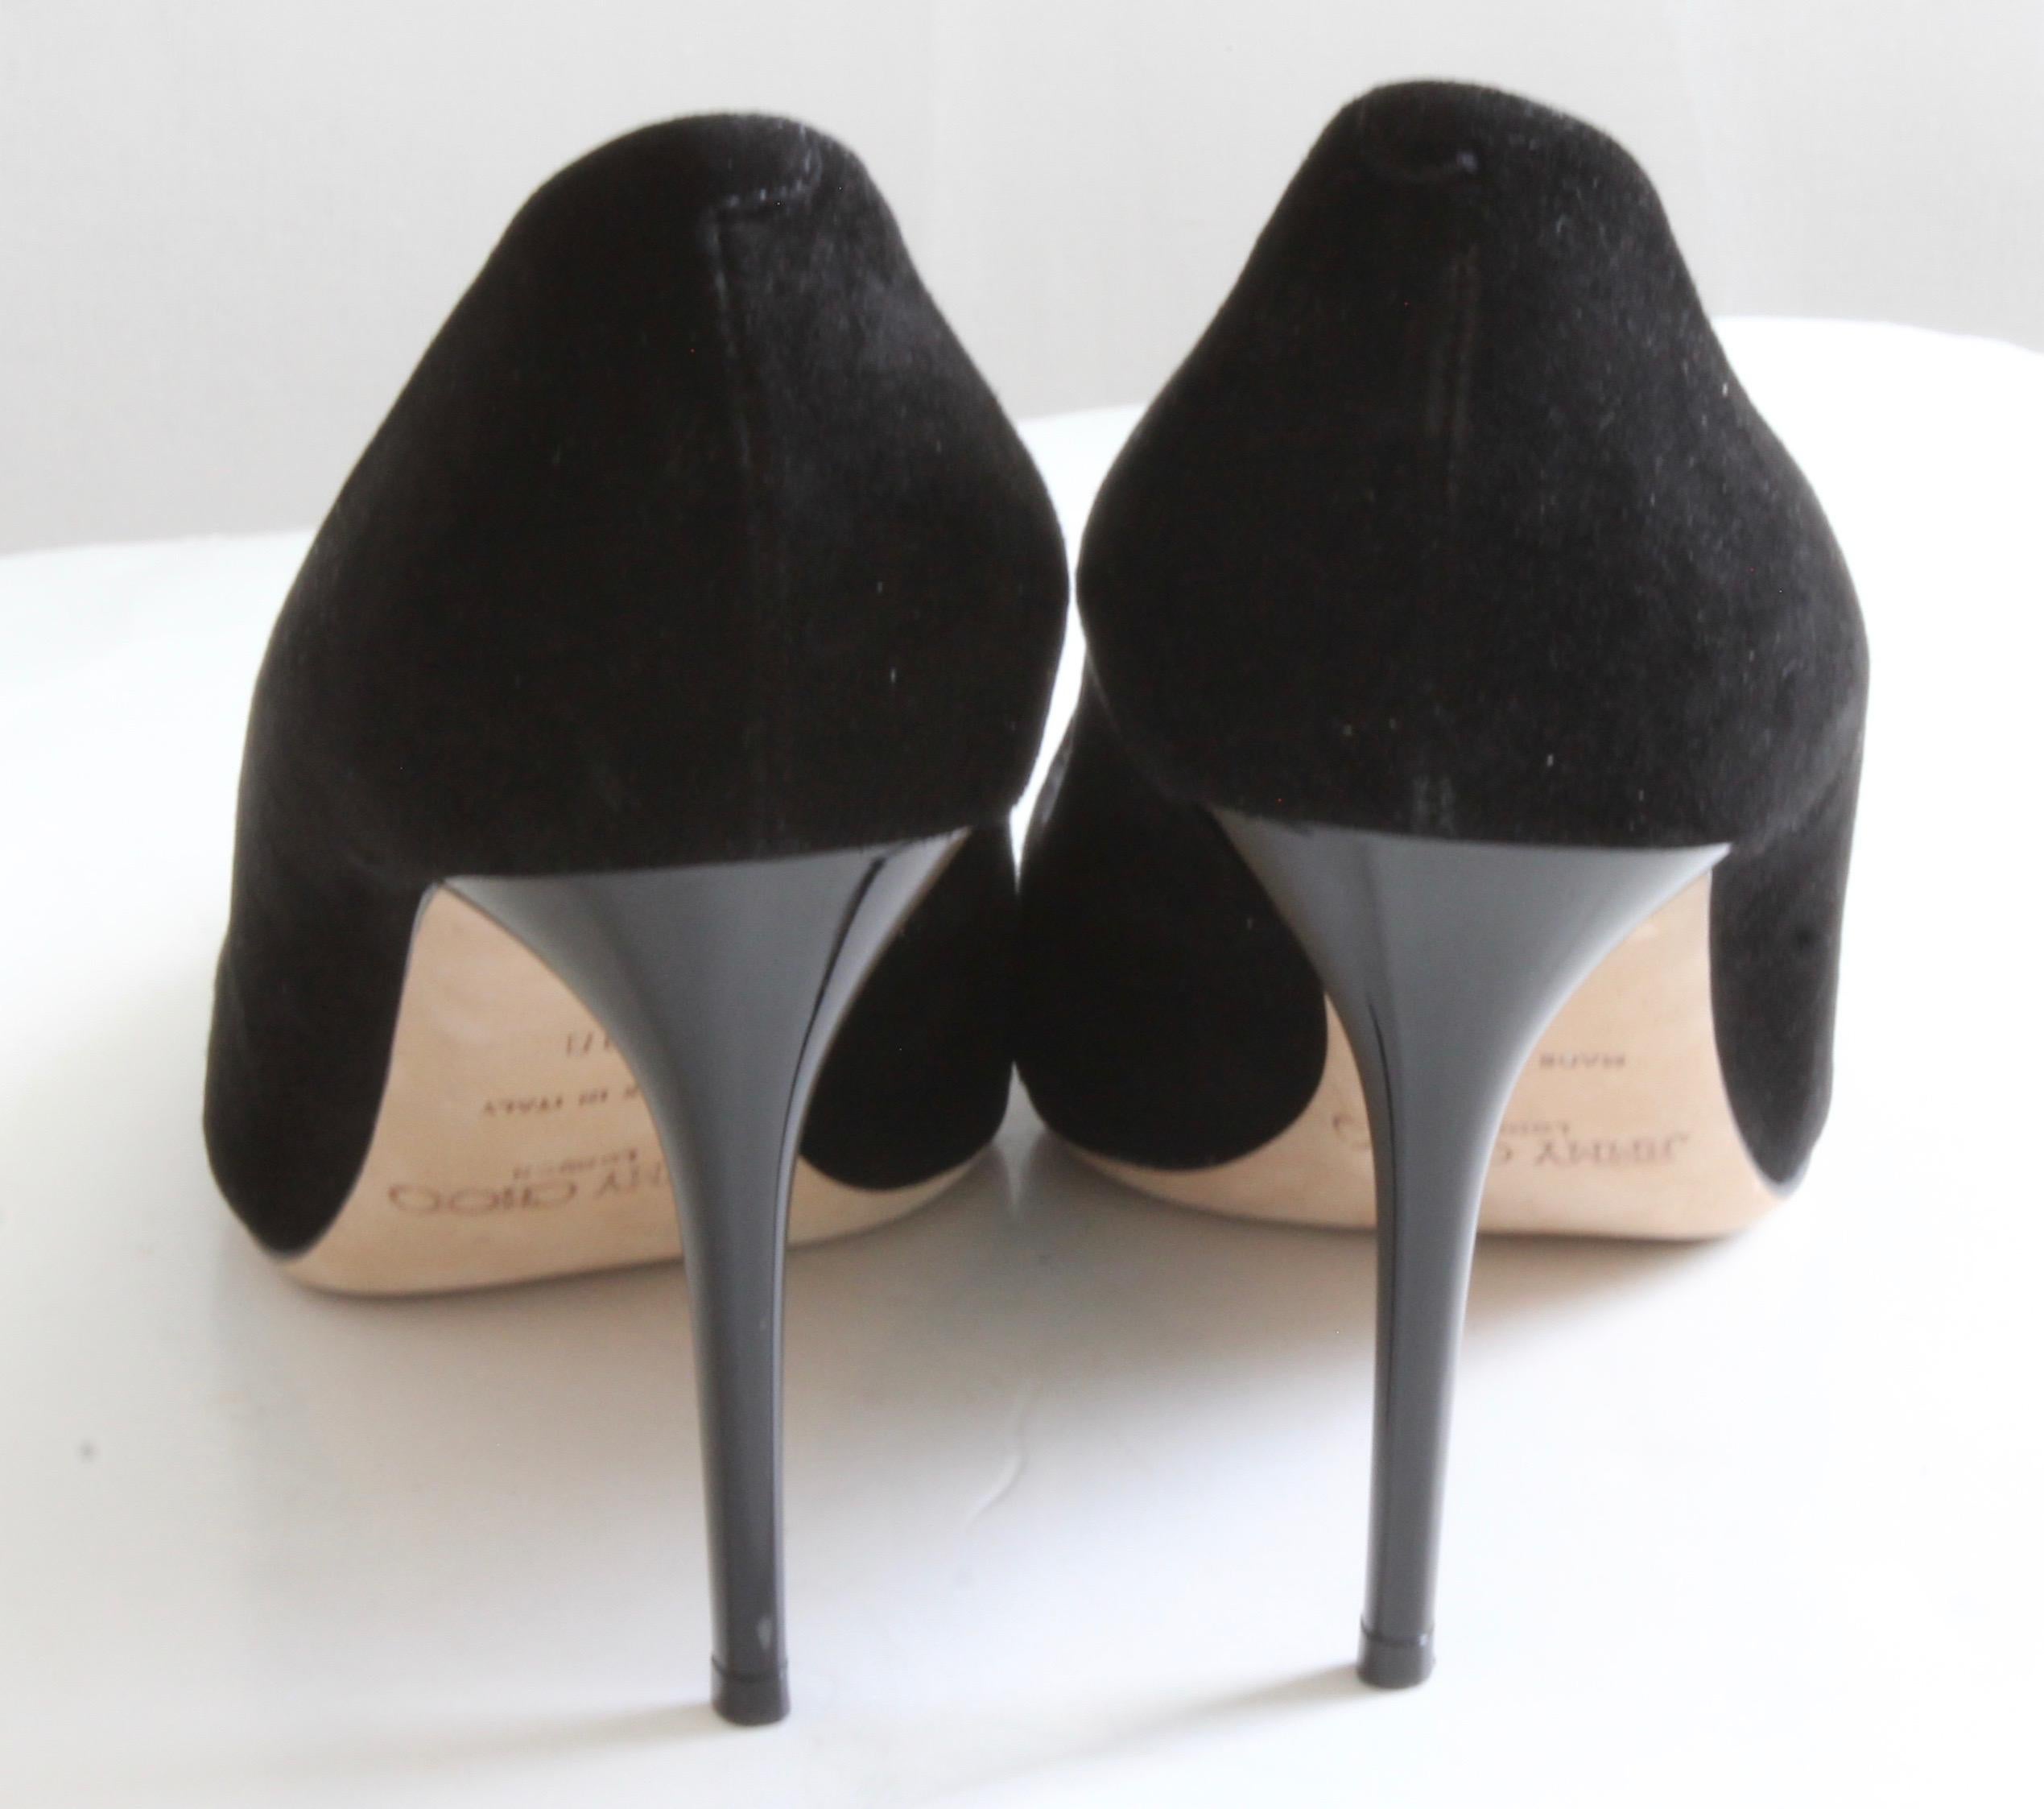 Jimmy Choo Heels Black Stiletto Pumps 247 Alia Suede Leather with Box In Good Condition For Sale In Port Saint Lucie, FL